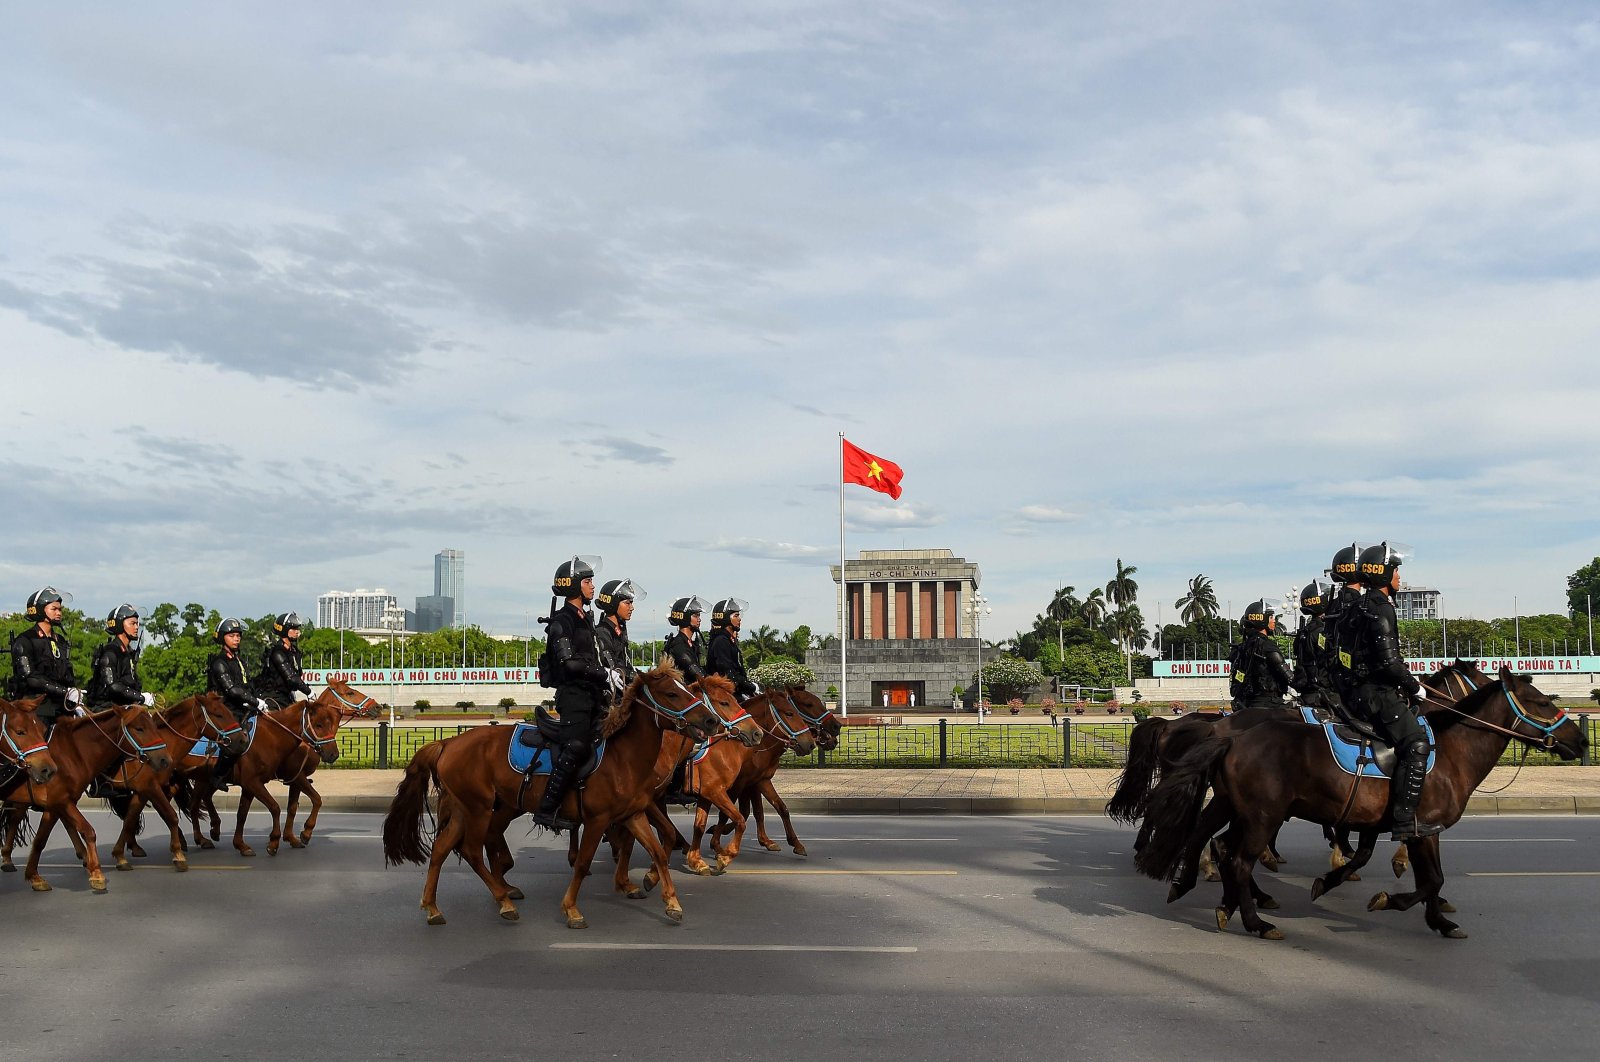 Mounted police personnel parade on horses past the Ho Chi Minh mausoleum in Hanoi, Vietnam, June 8, 2020. (AFP Photo)